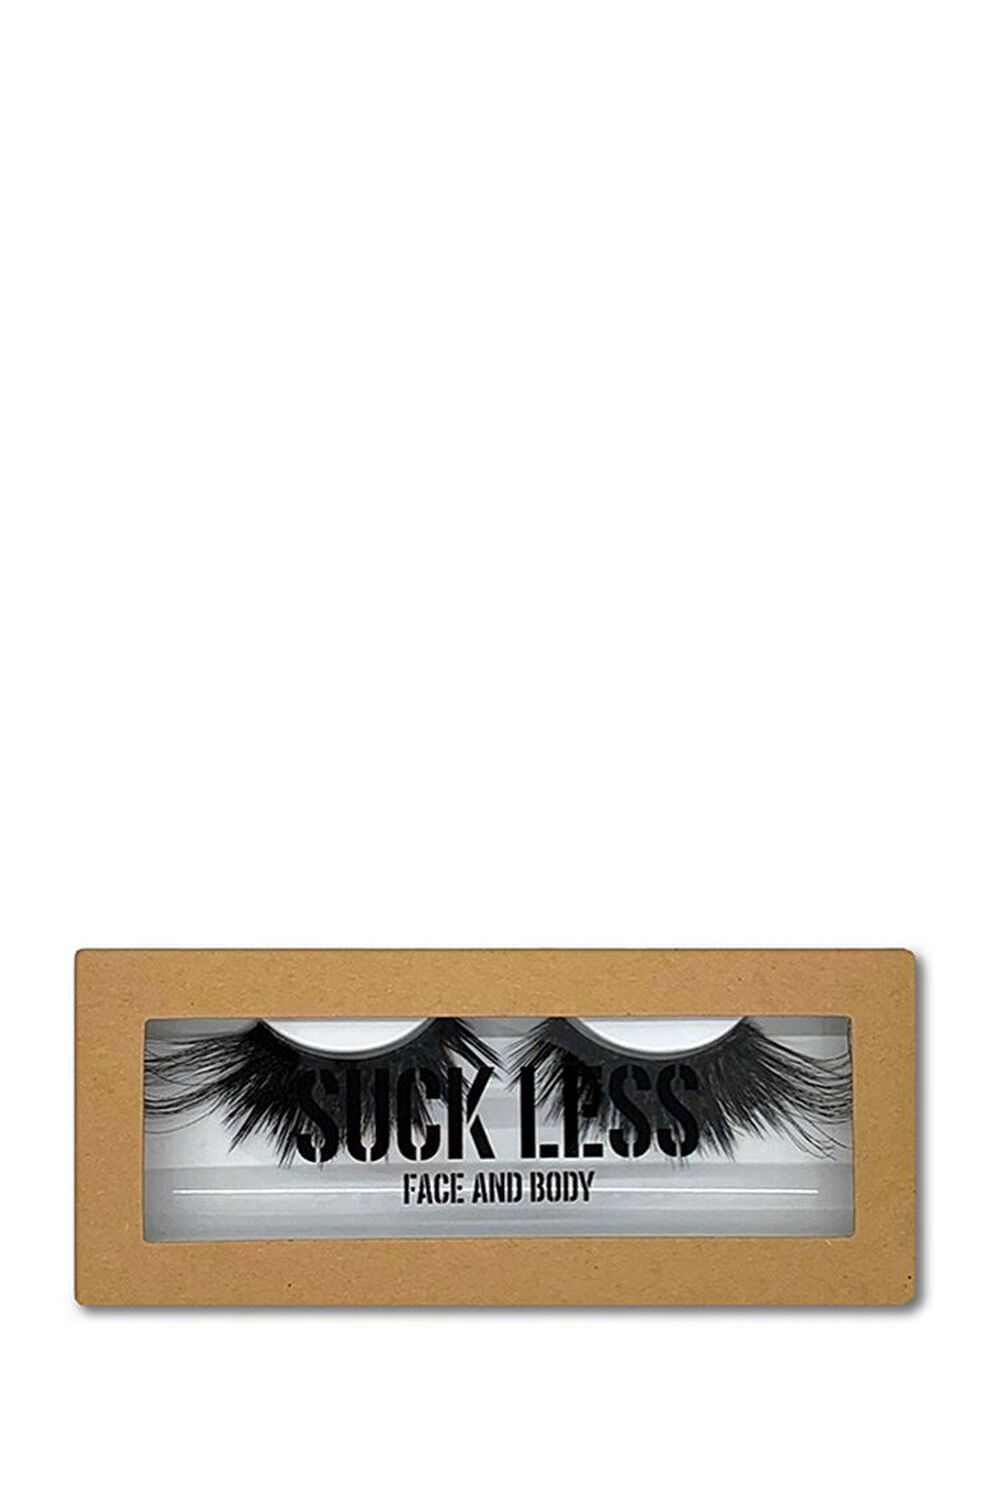 BLACK Suck Less Face & Body Day Lashes, image 1